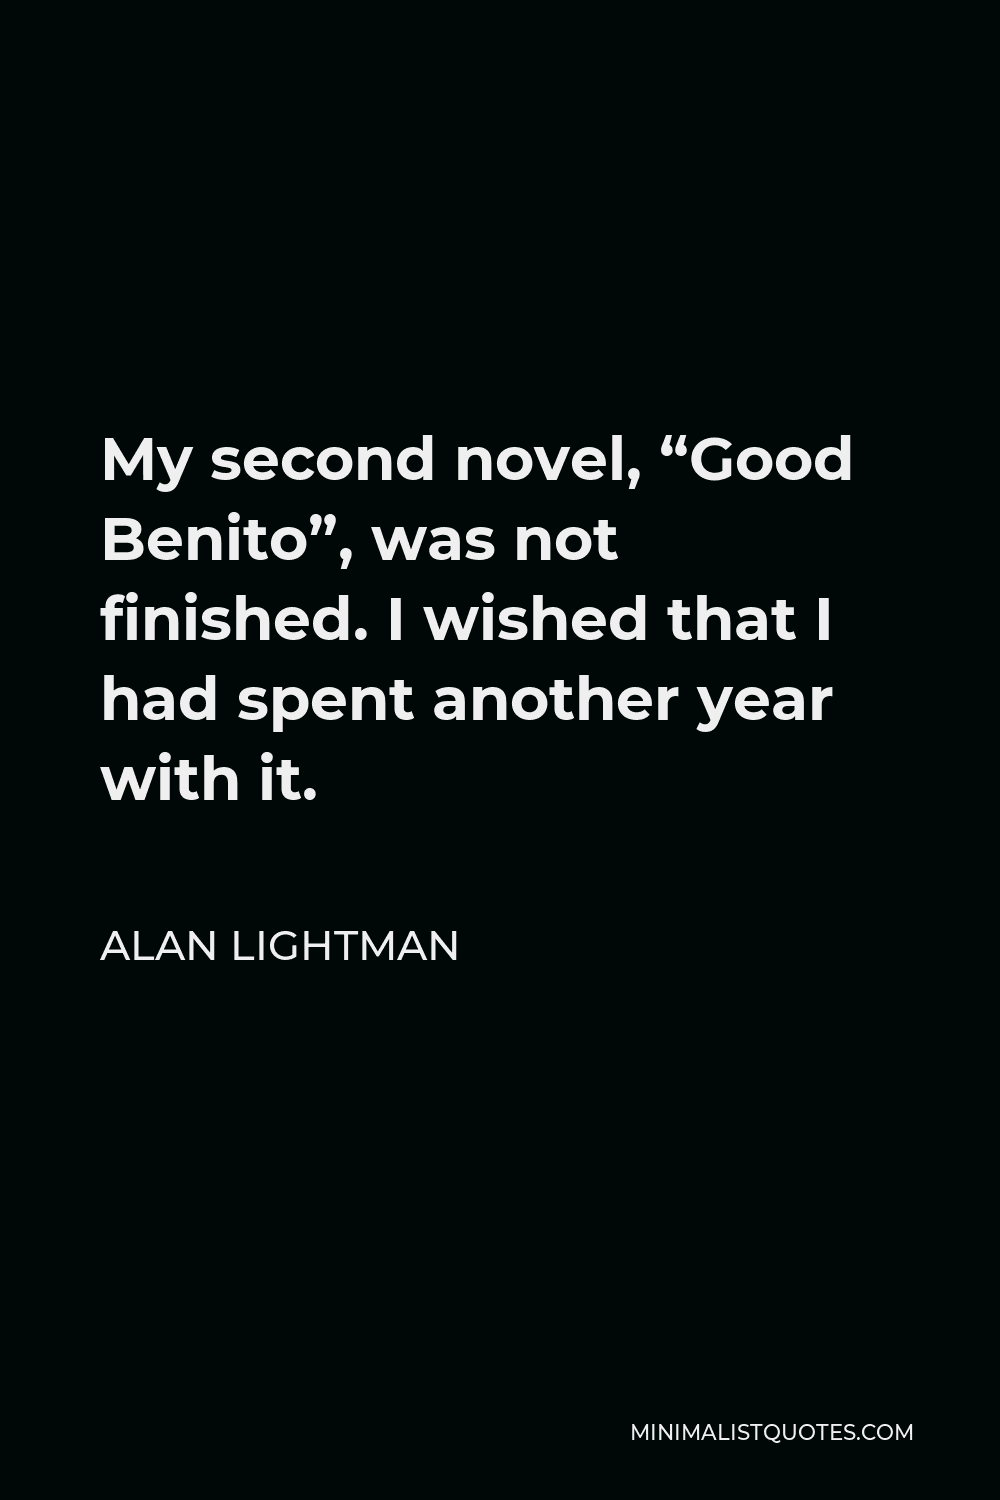 Alan Lightman Quote - My second novel, “Good Benito”, was not finished. I wished that I had spent another year with it.